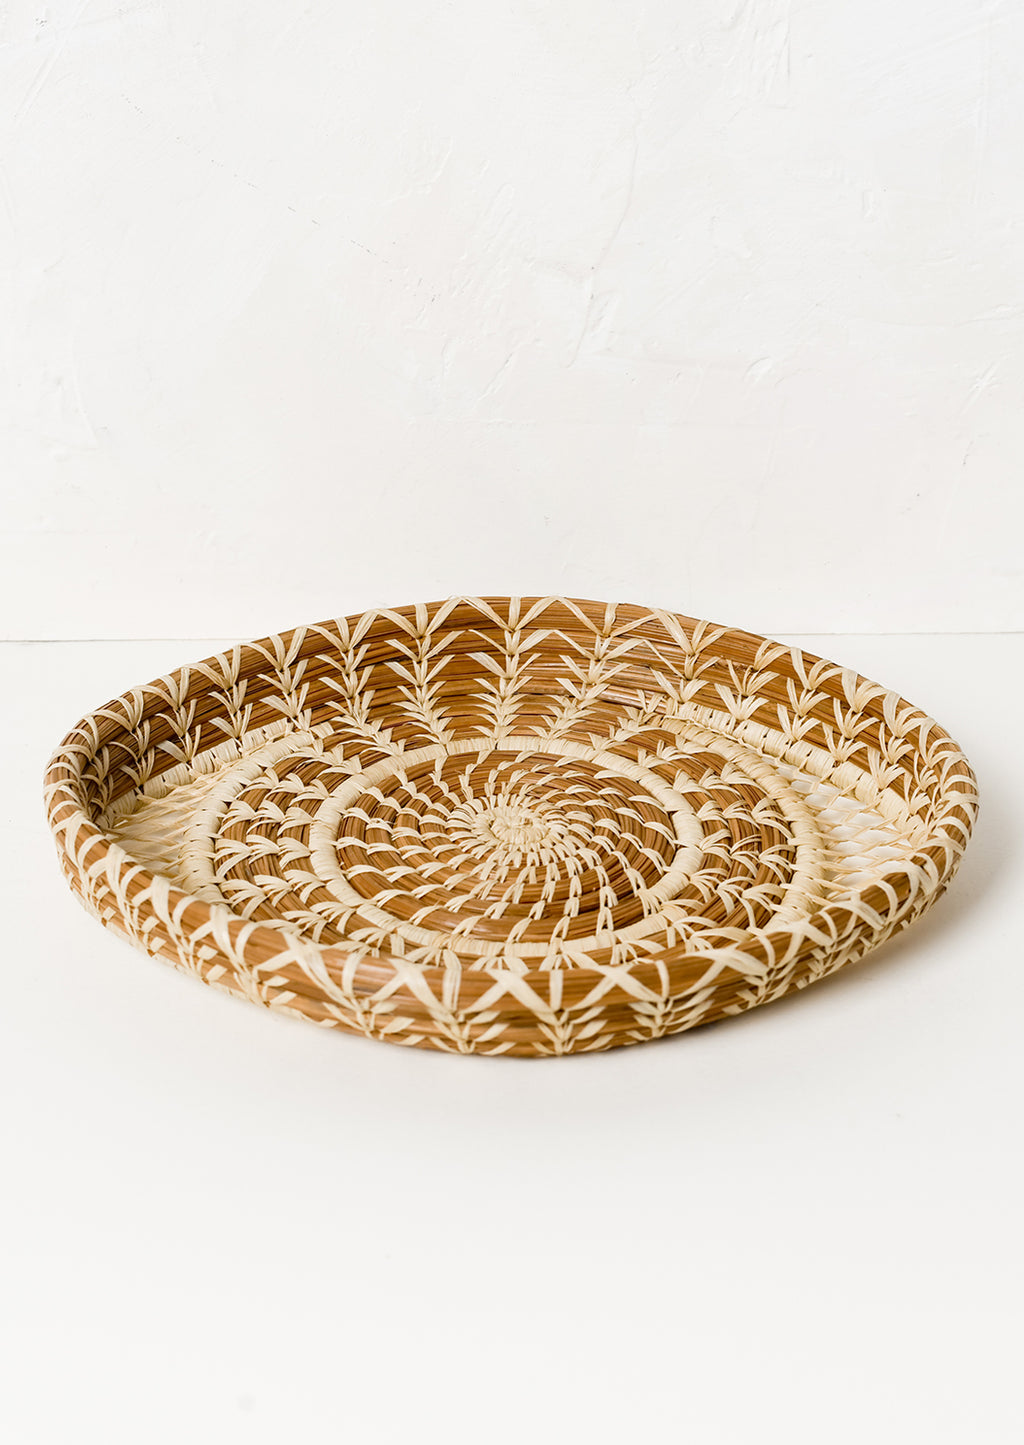 2: A shallow woven pine needle platter with raffia pattern detailing.